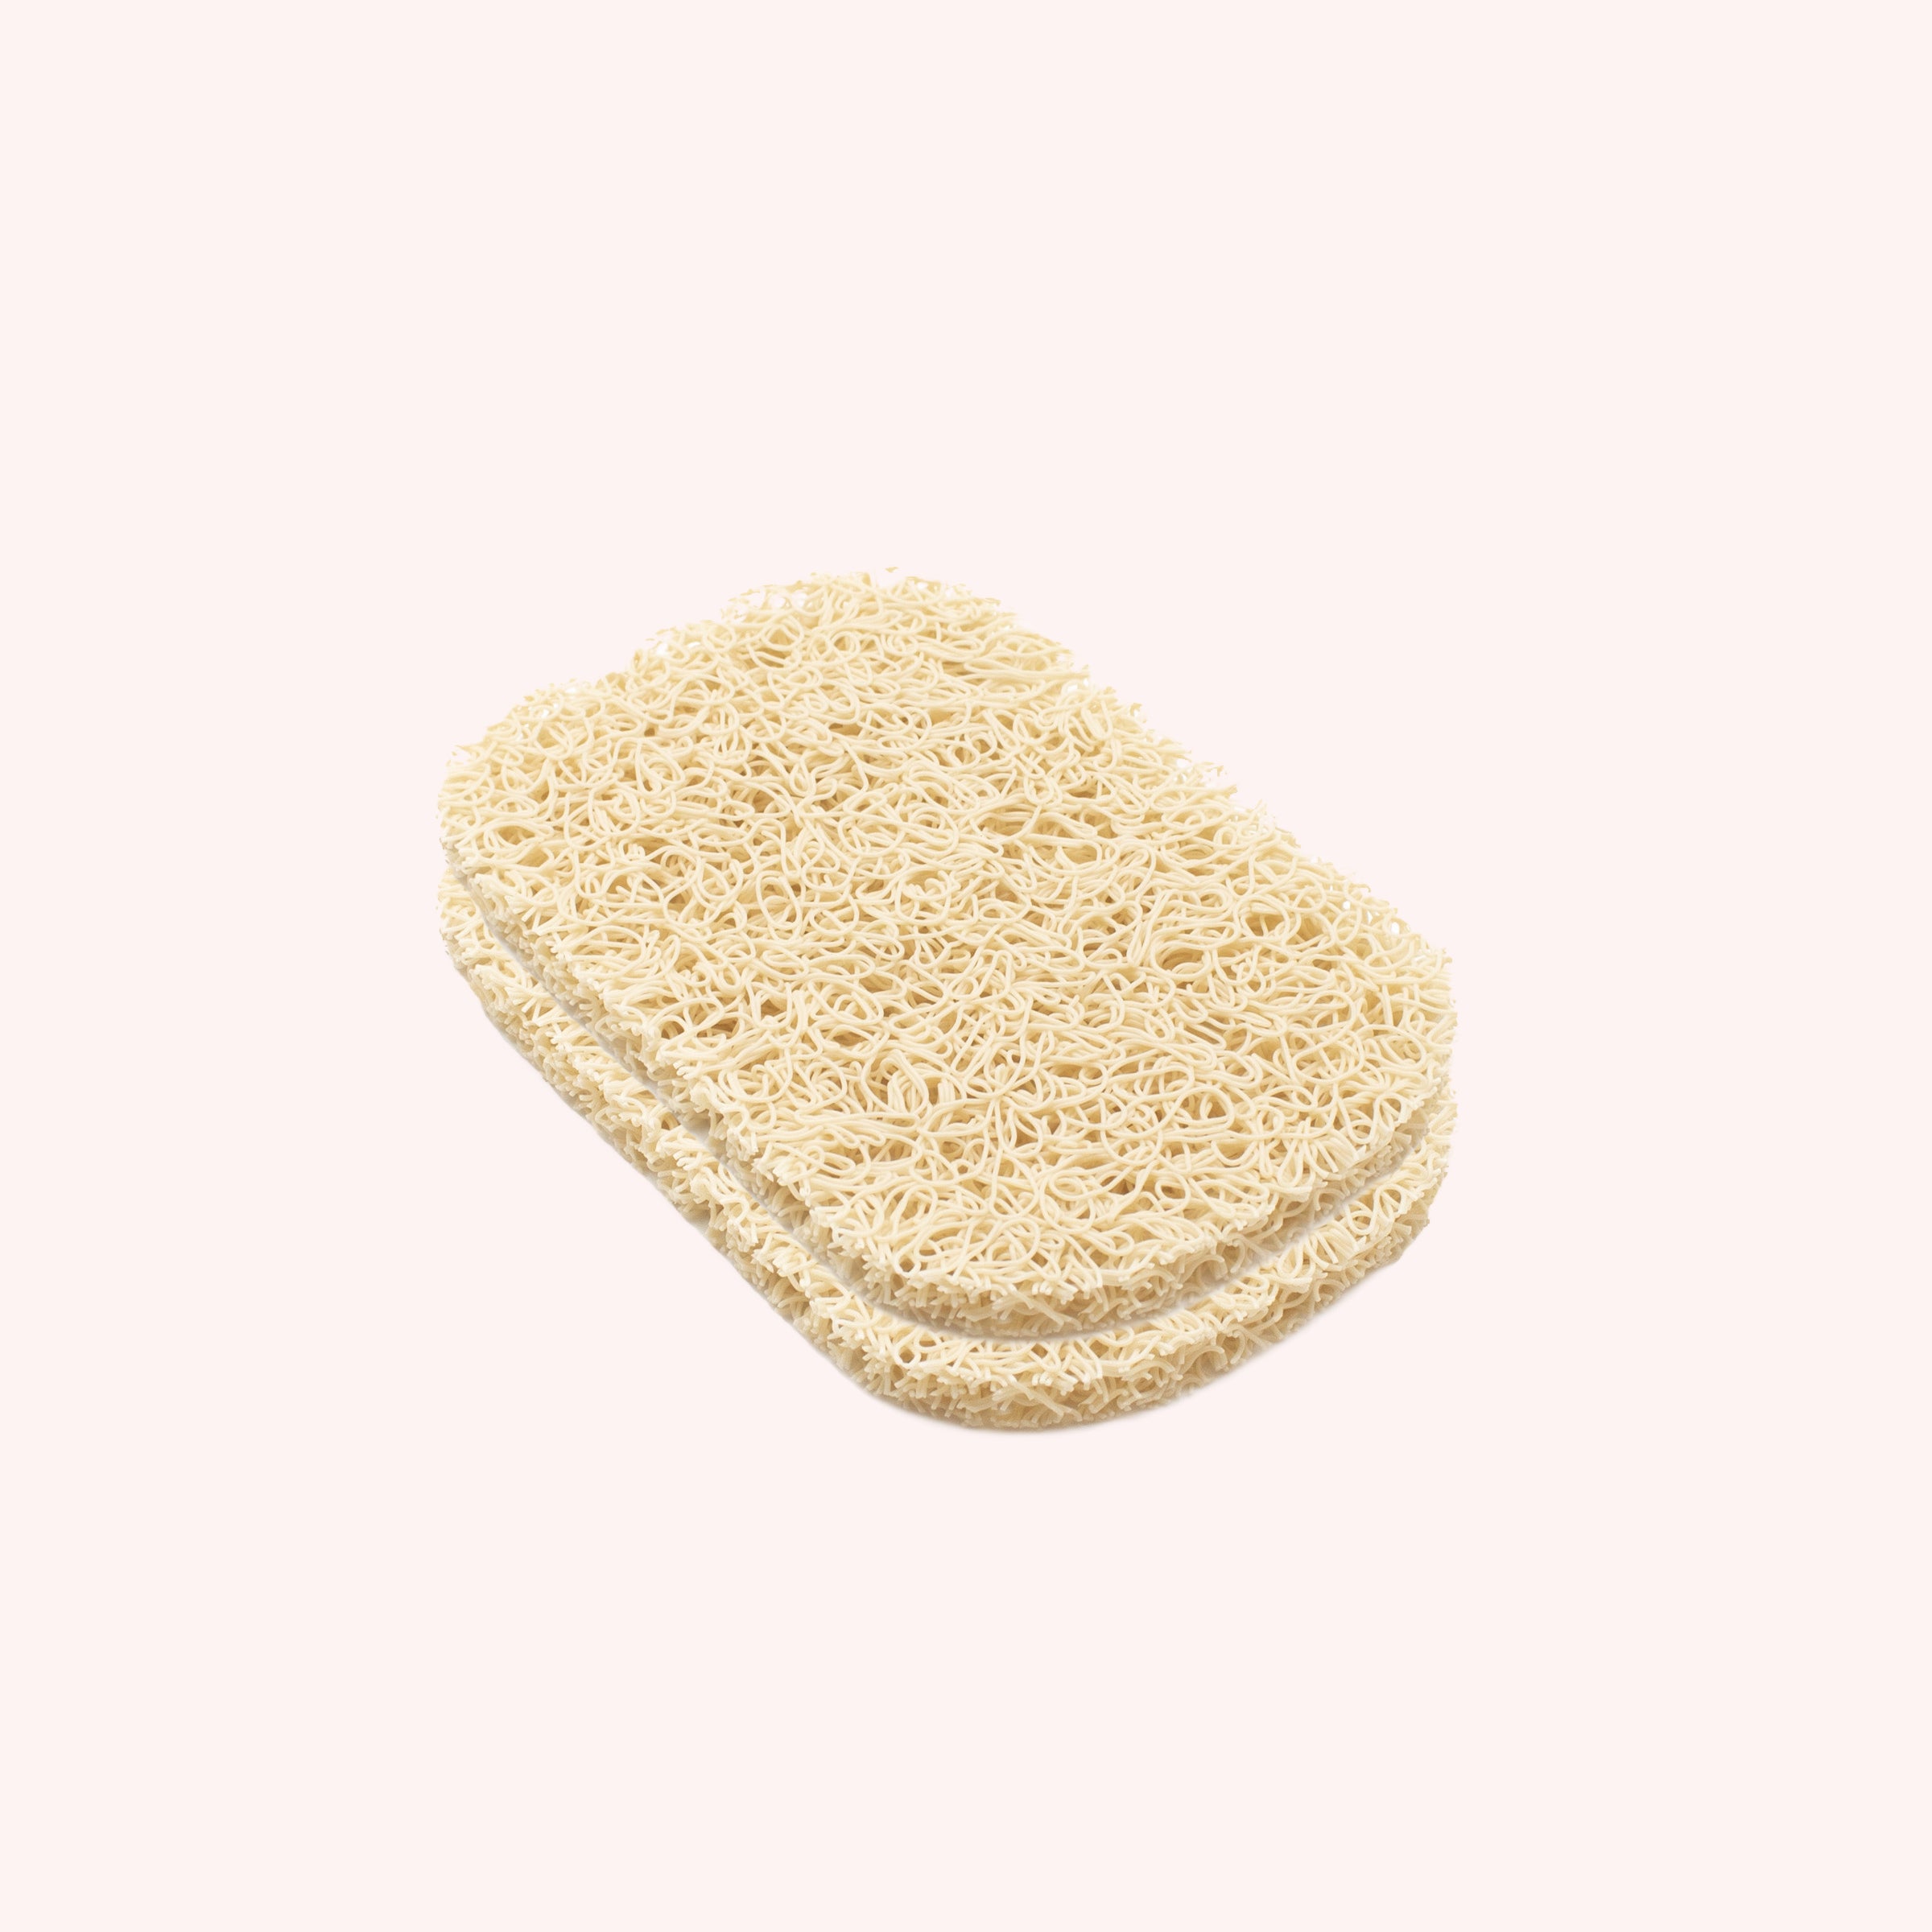 Dry Soap Holder Pad - 2 Pack